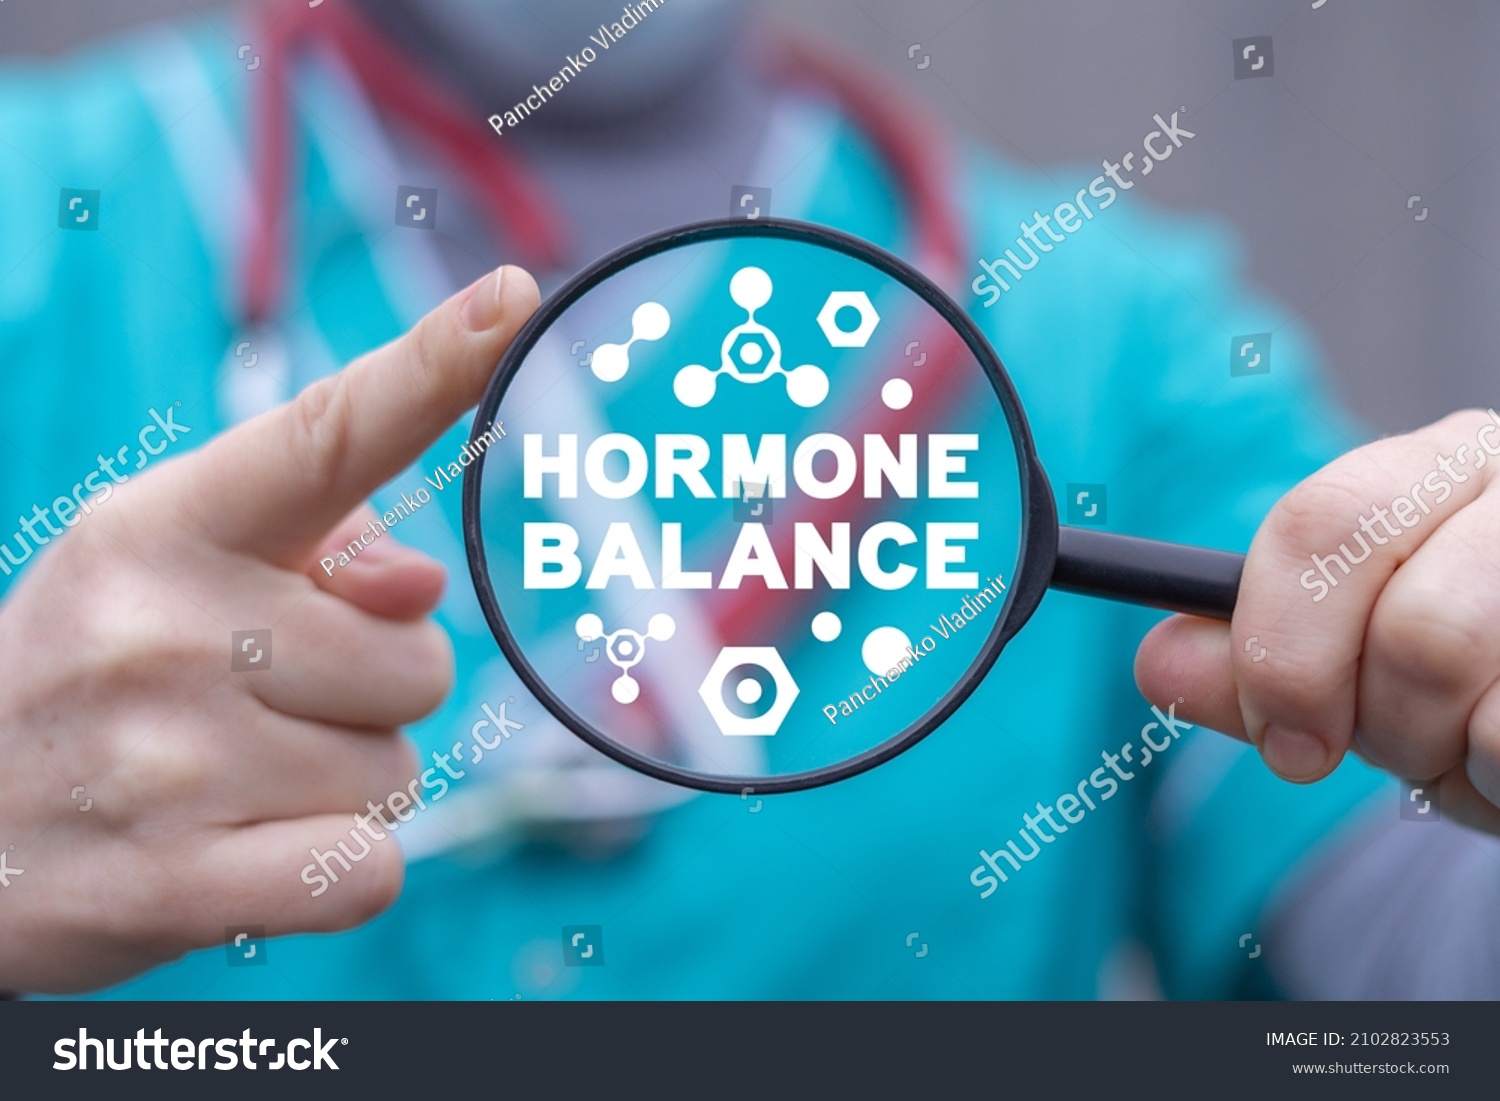 Medical and scientific concept of hormone balance. Hormonal therapy. Hormones research and innovative treatment. #2102823553